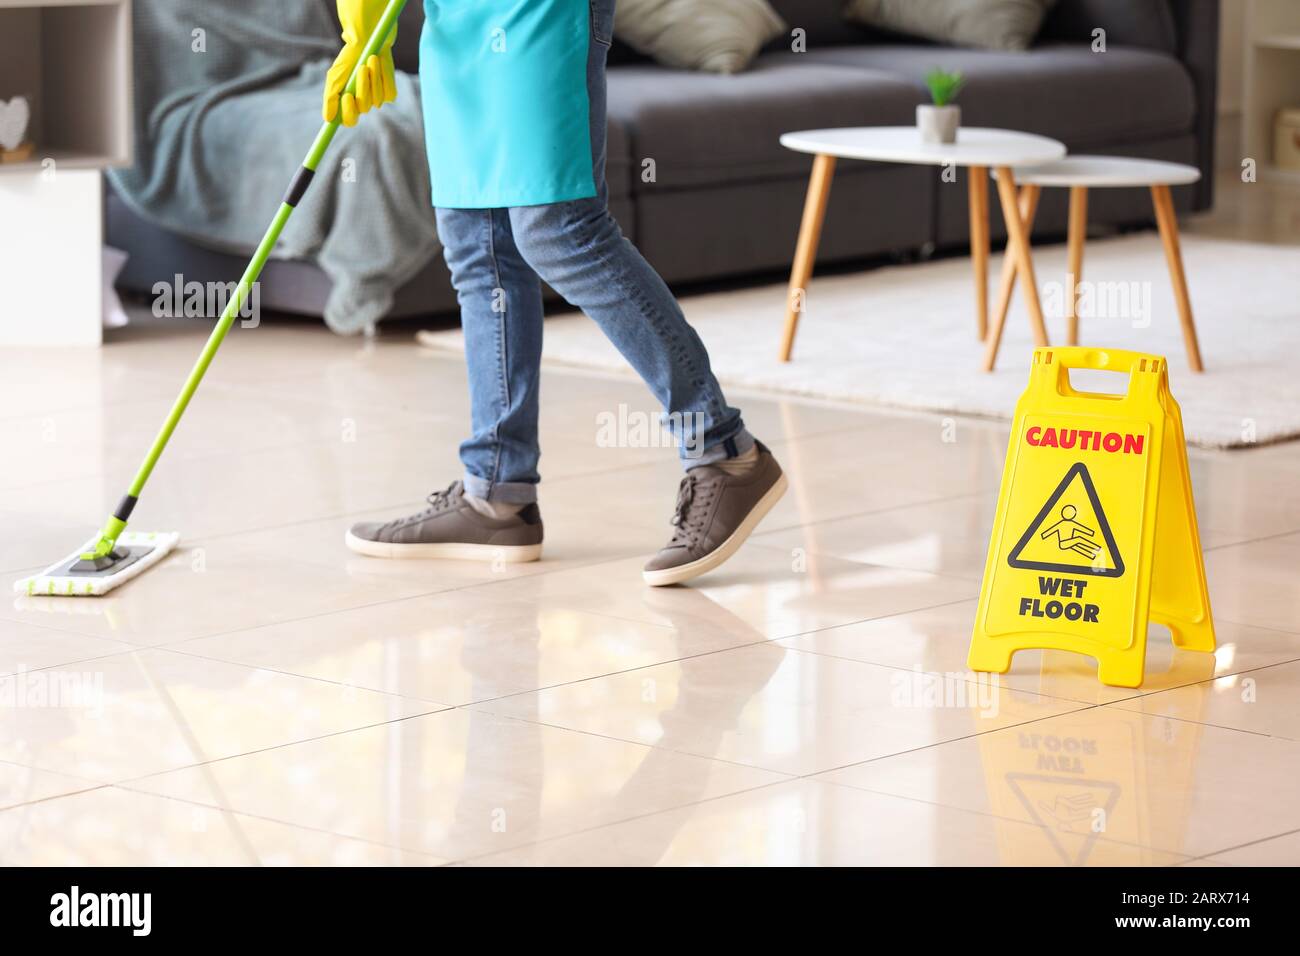 Male janitor mopping floor in flat Stock Photo